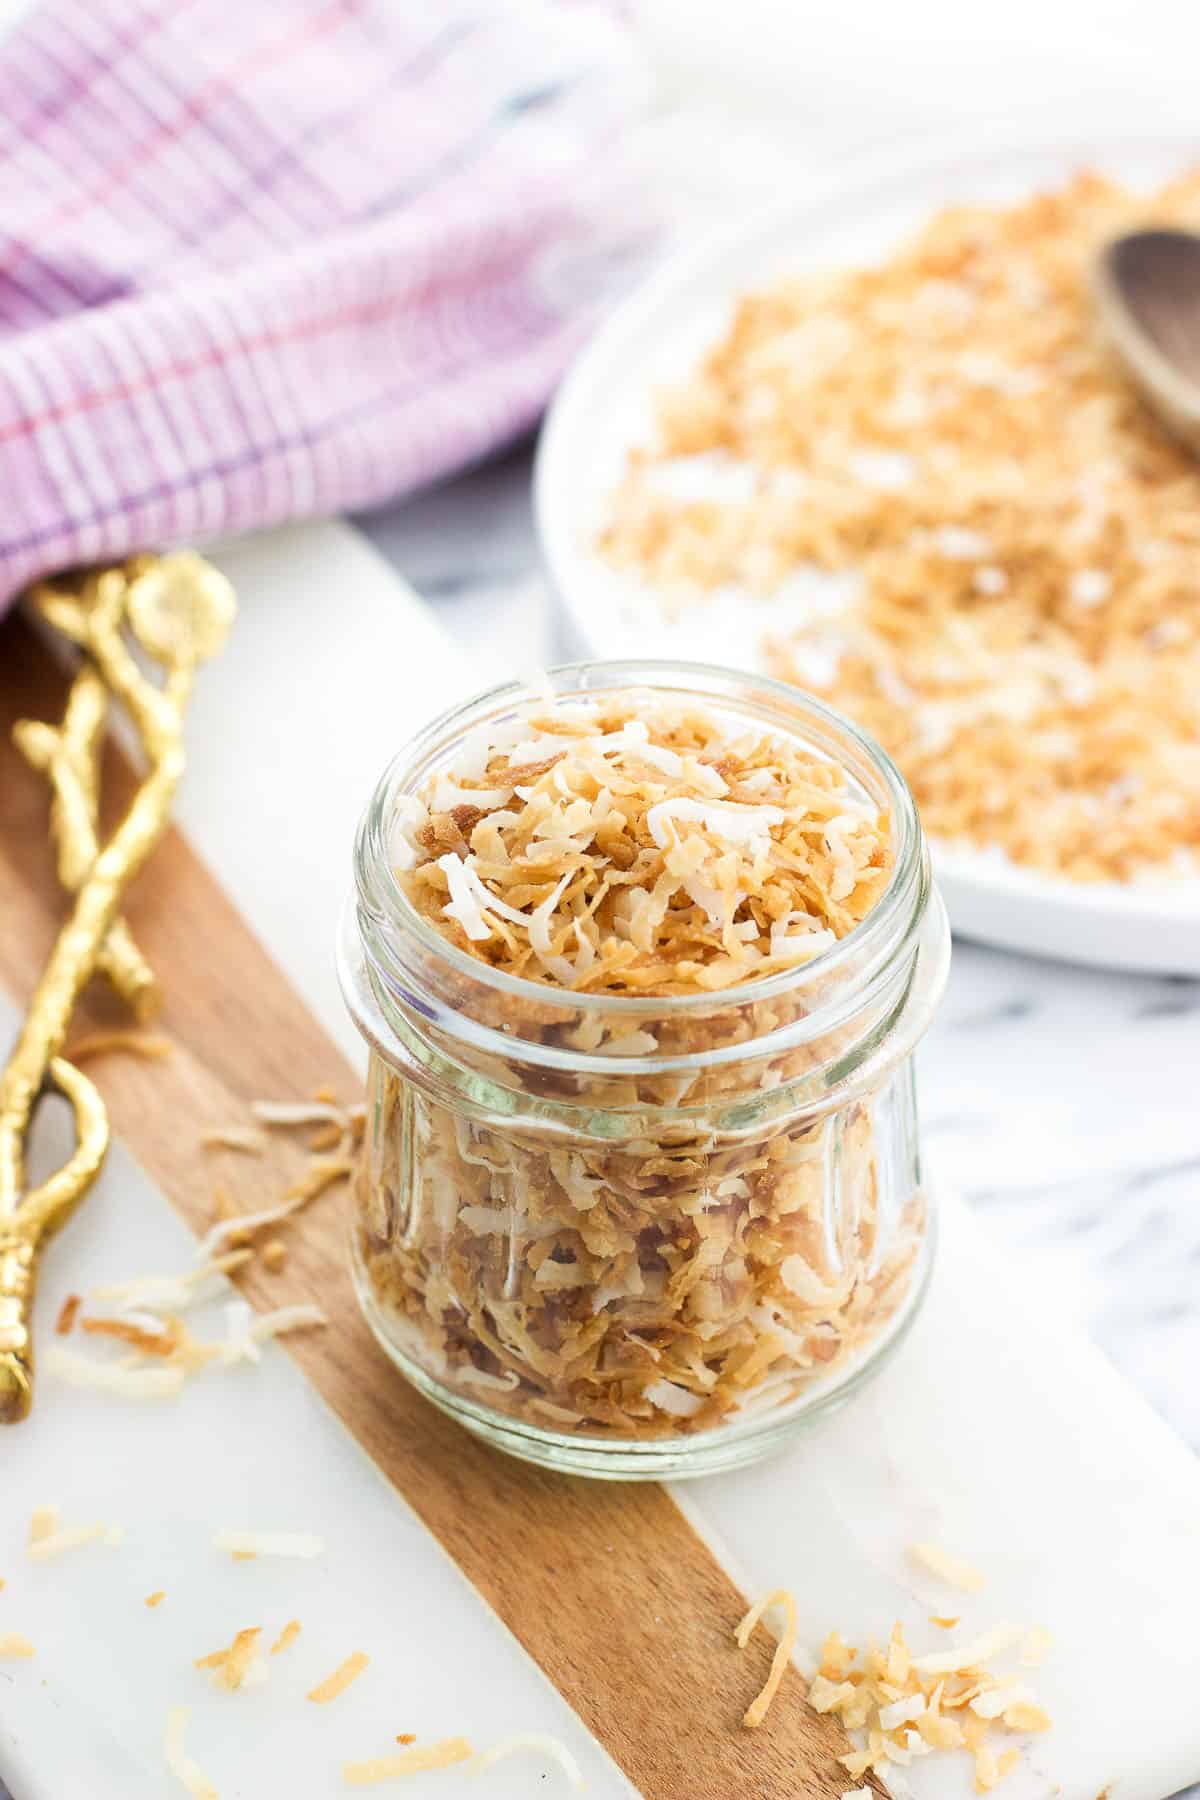 A glass jar filled with toasted coconut flakes.